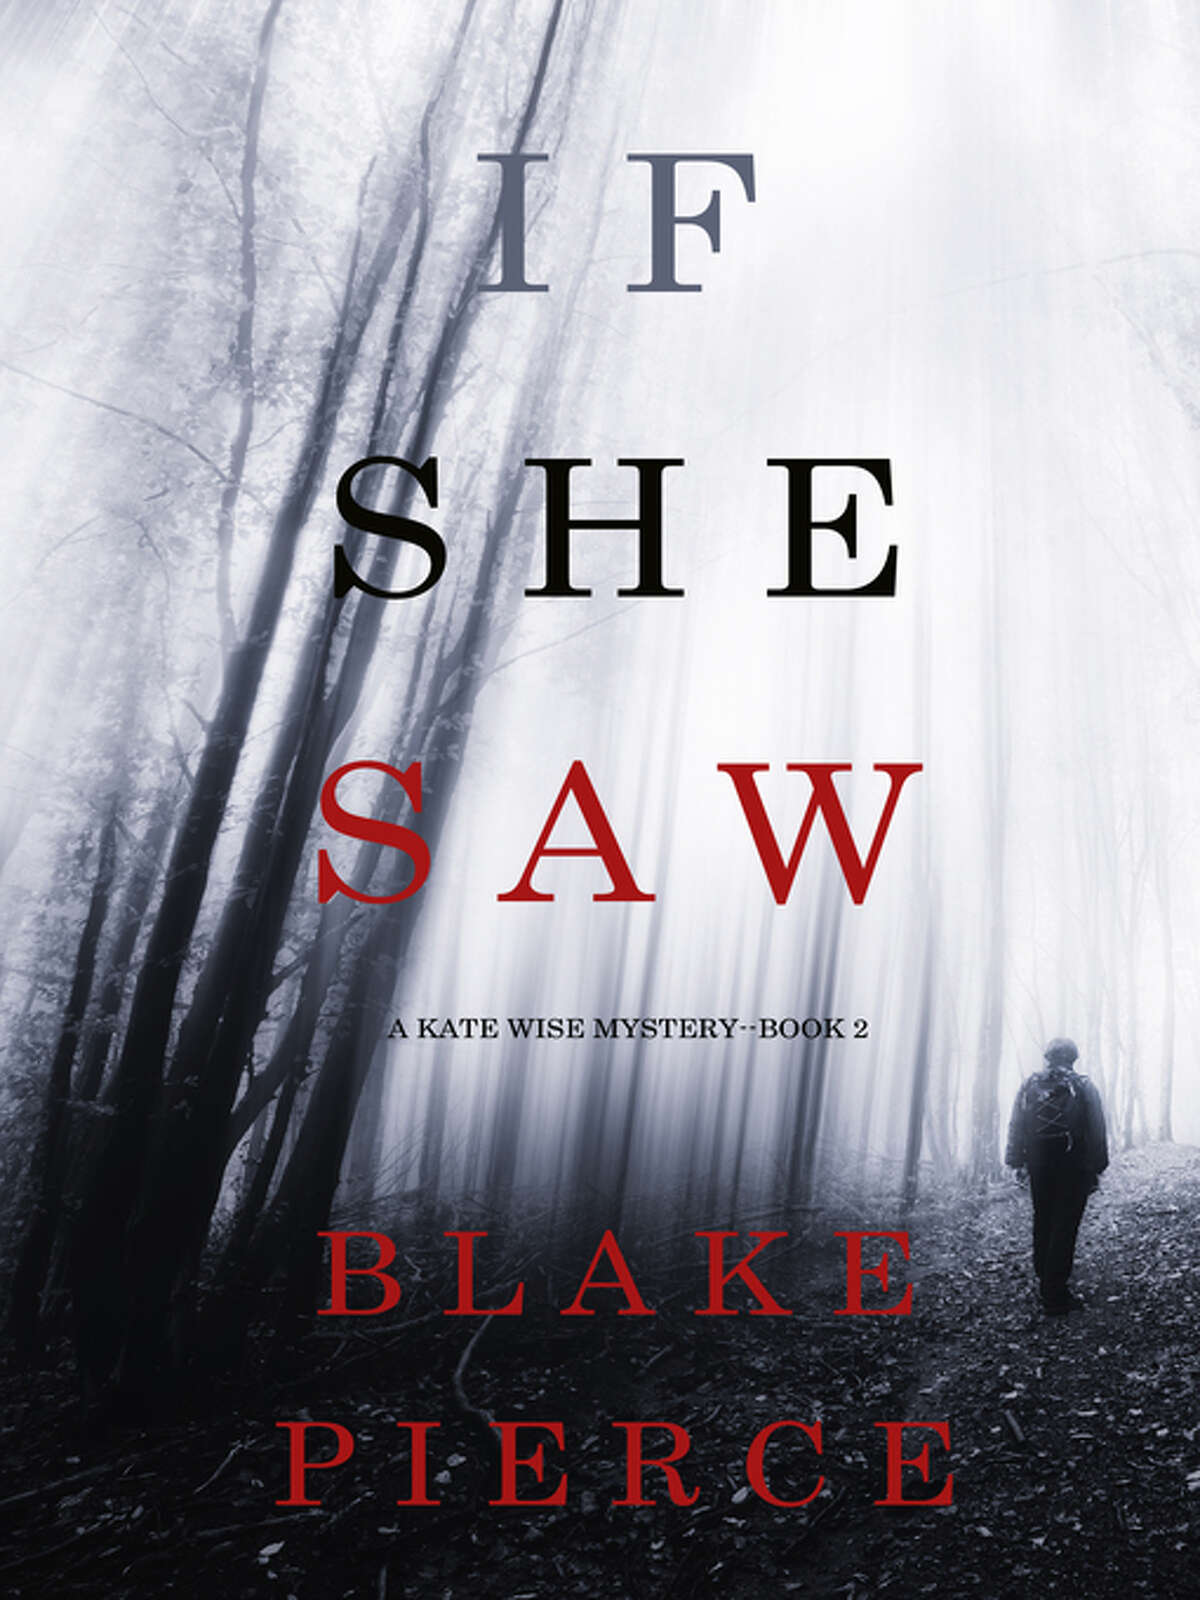 8. If She Saw: A Kate Wise Mystery, by Blake Pierce Checkout total: 61